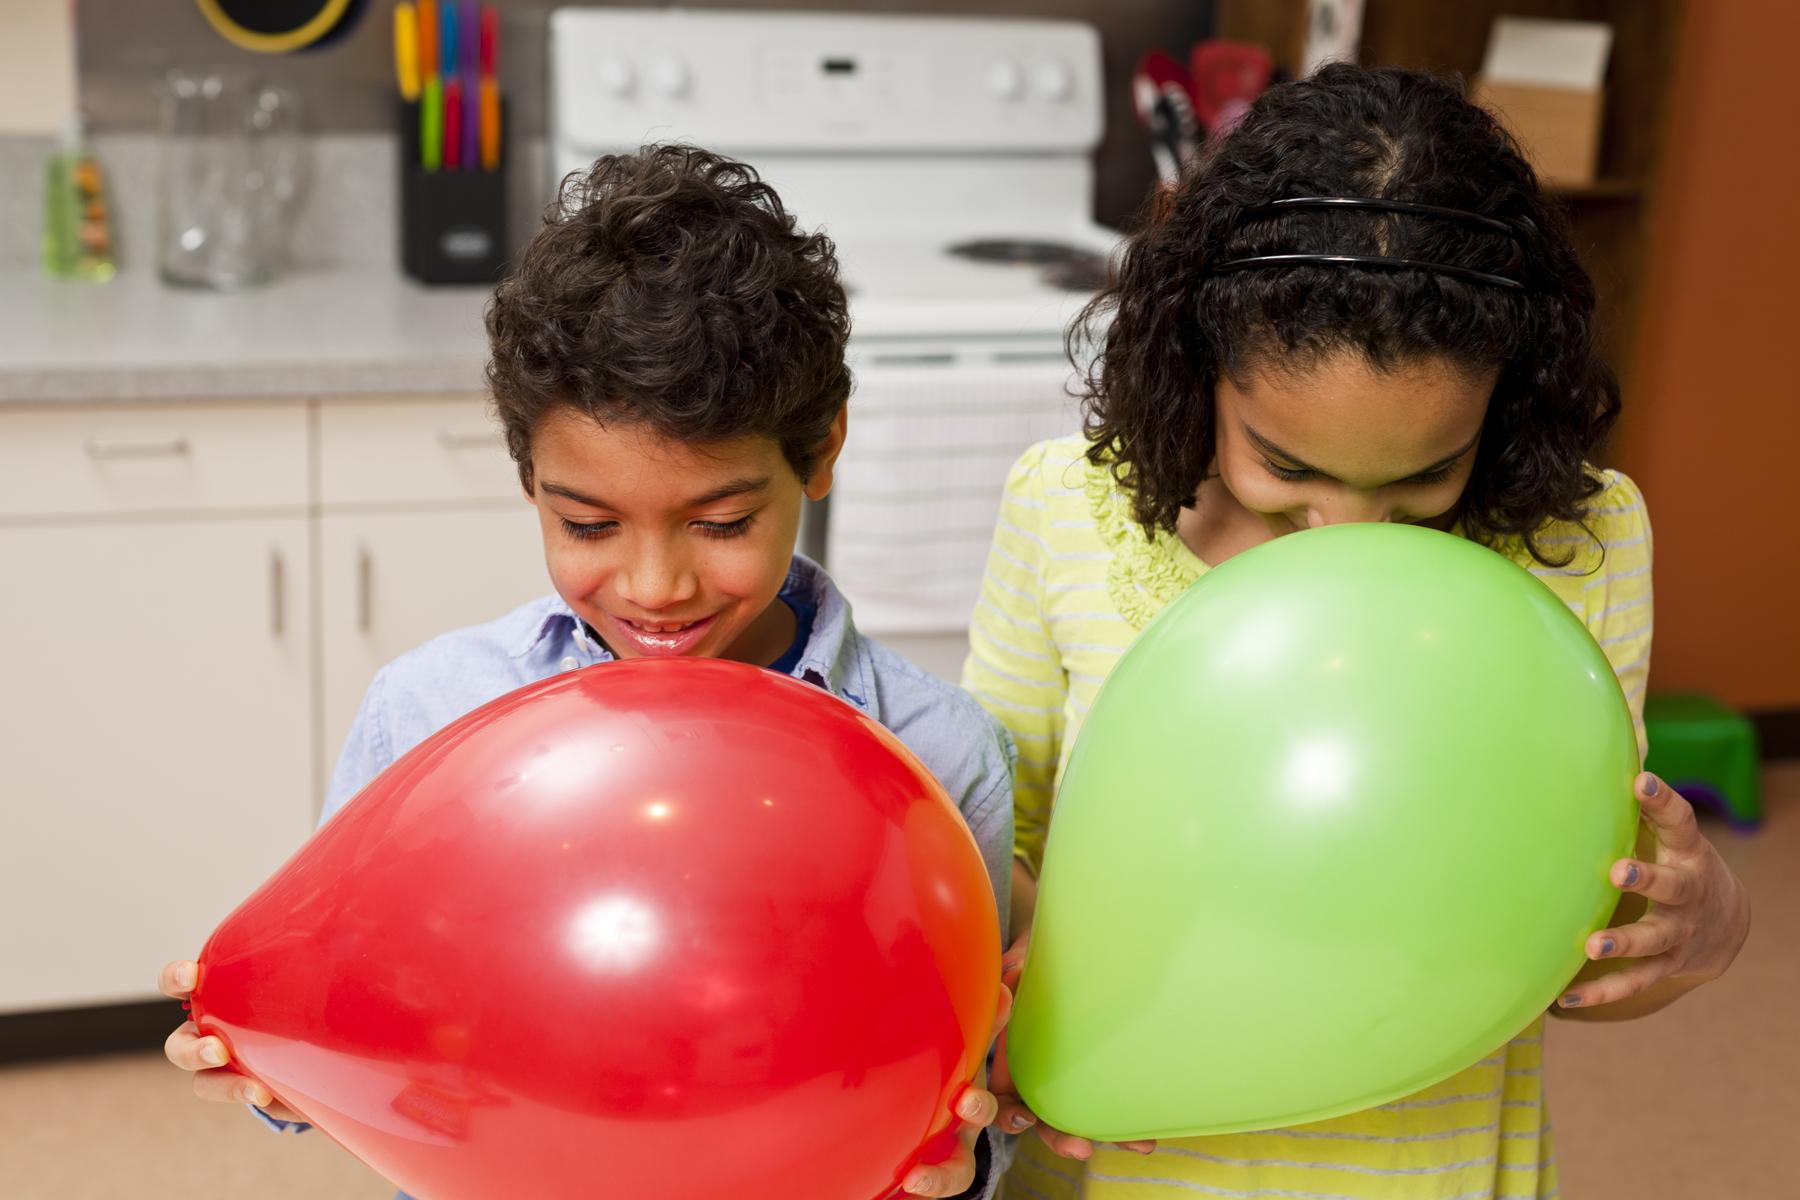 Two learners hold green and red balloons and smell them to identify the hidden scent inside